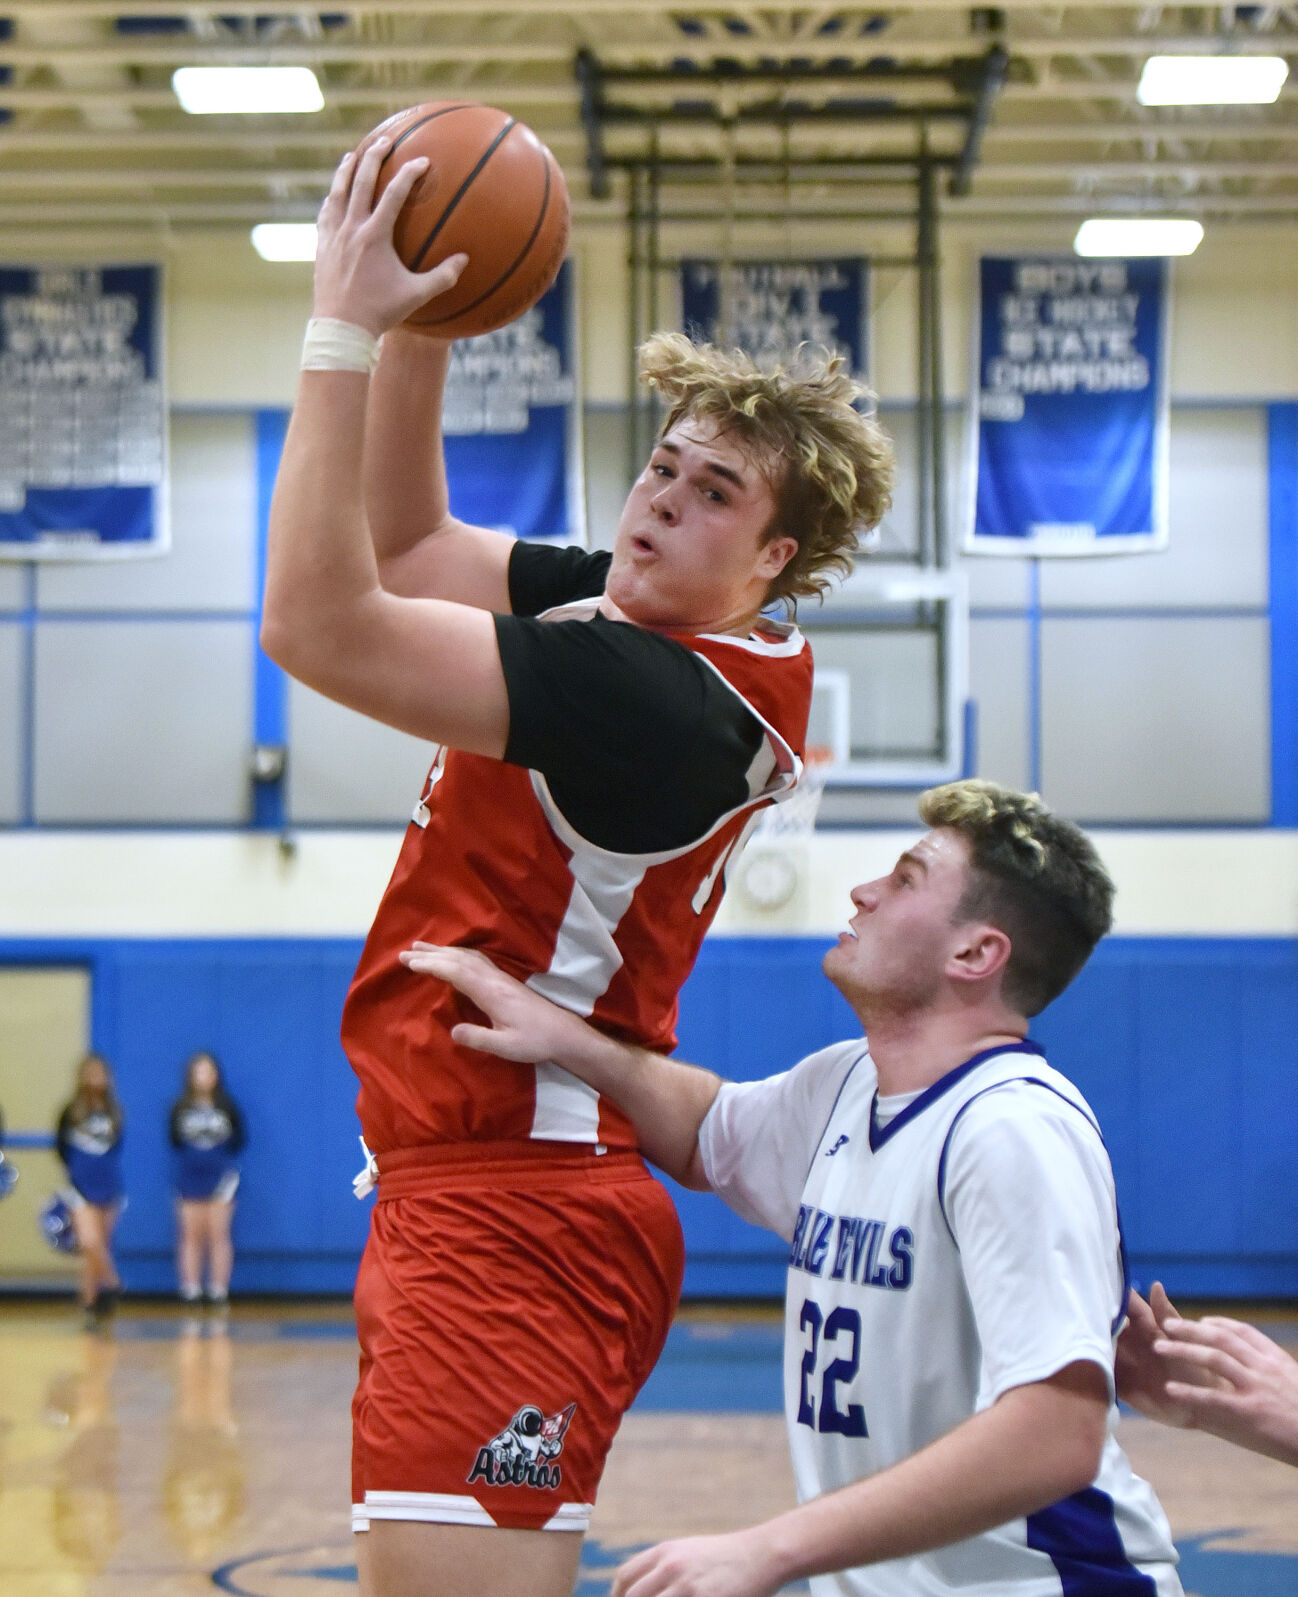 Exciting High School Sports Update: Pinkerton and Pelham Lead Division Standings, Jackson Marshall Shines in Boys Basketball